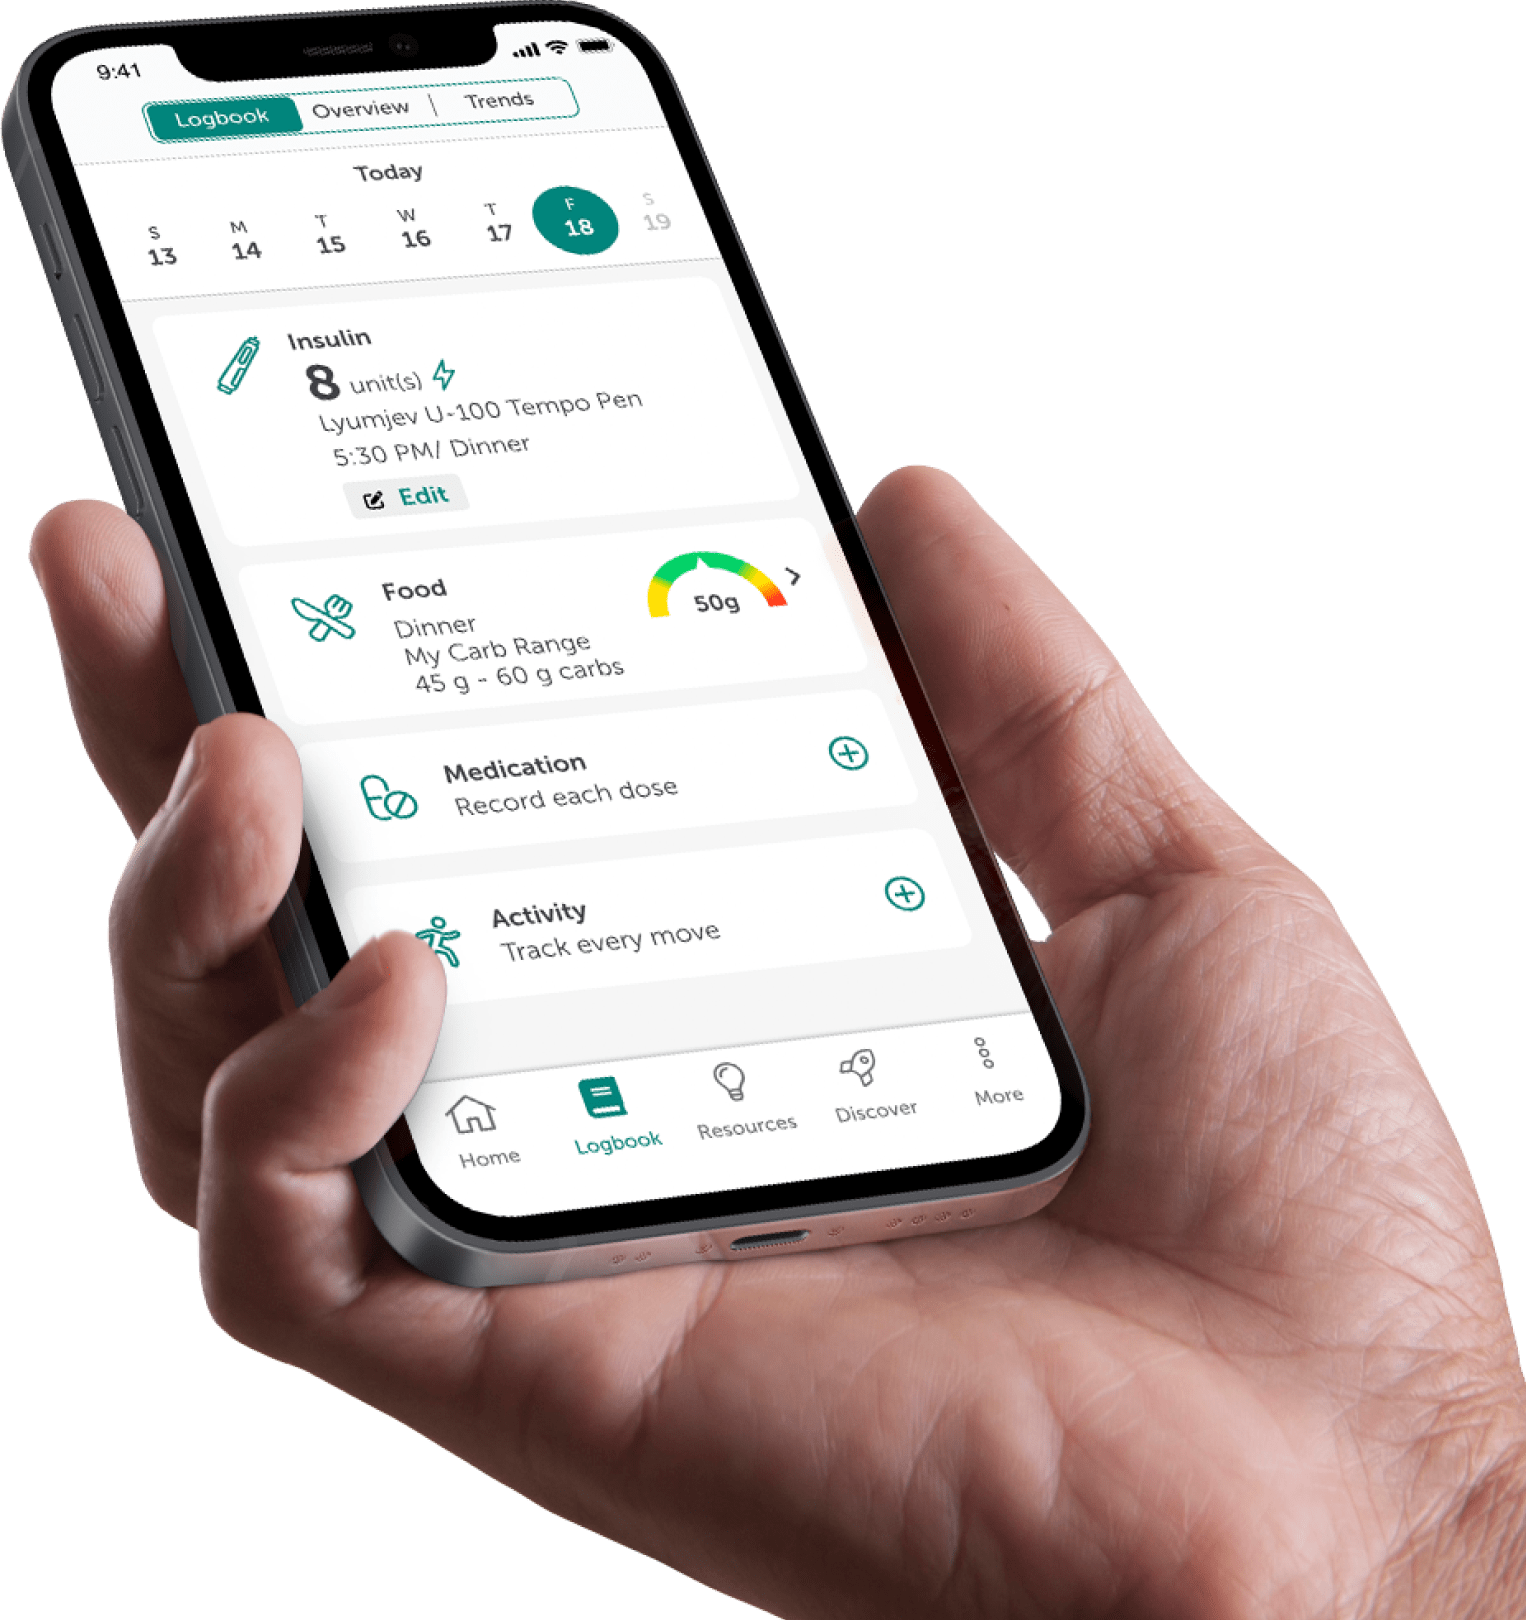 The TempoSmart app shows patient Logbook on a smartphone